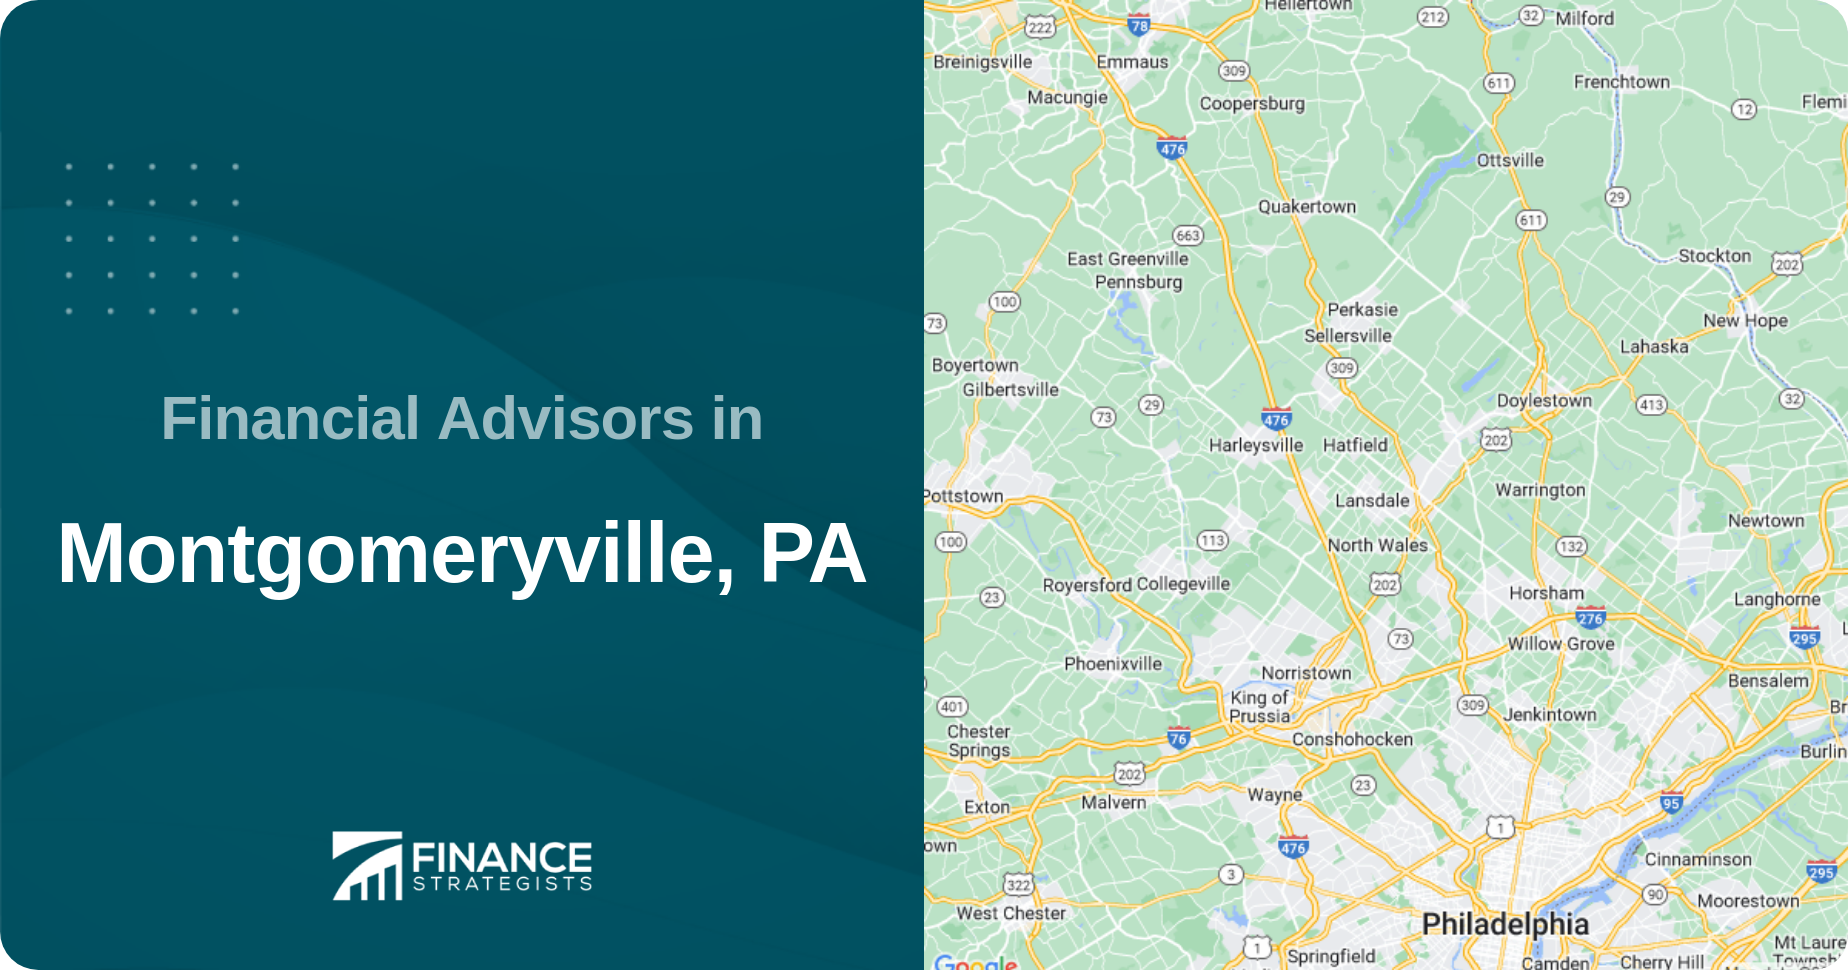 Financial Advisors in Montgomeryville, PA